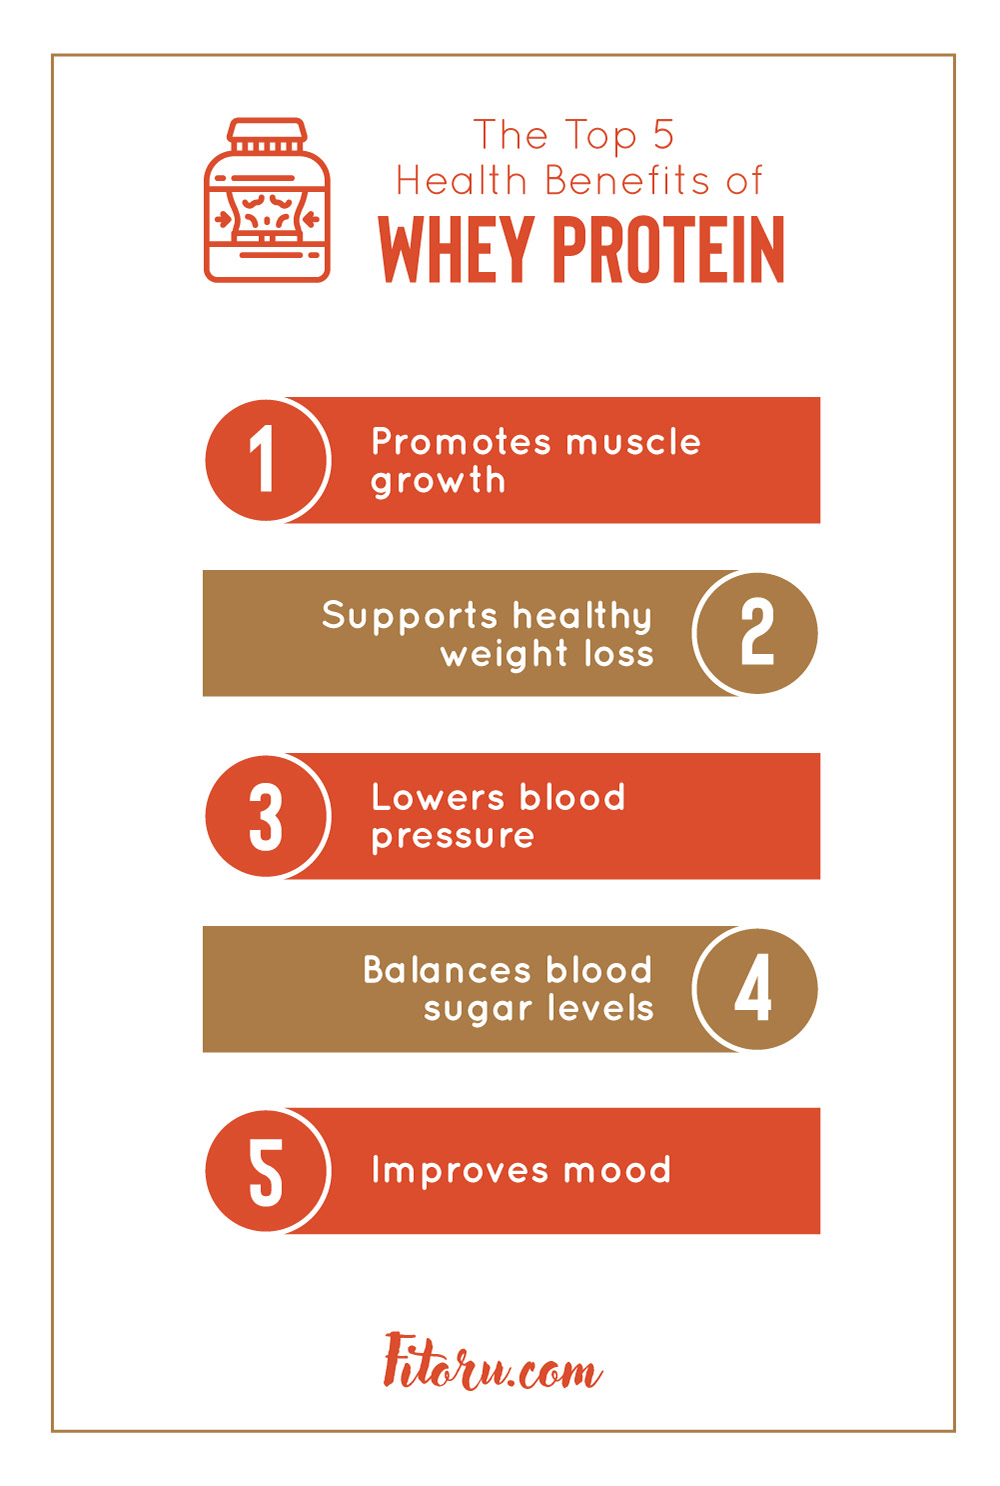 Get the scoop on whey protein nutrition facts and health benefits.